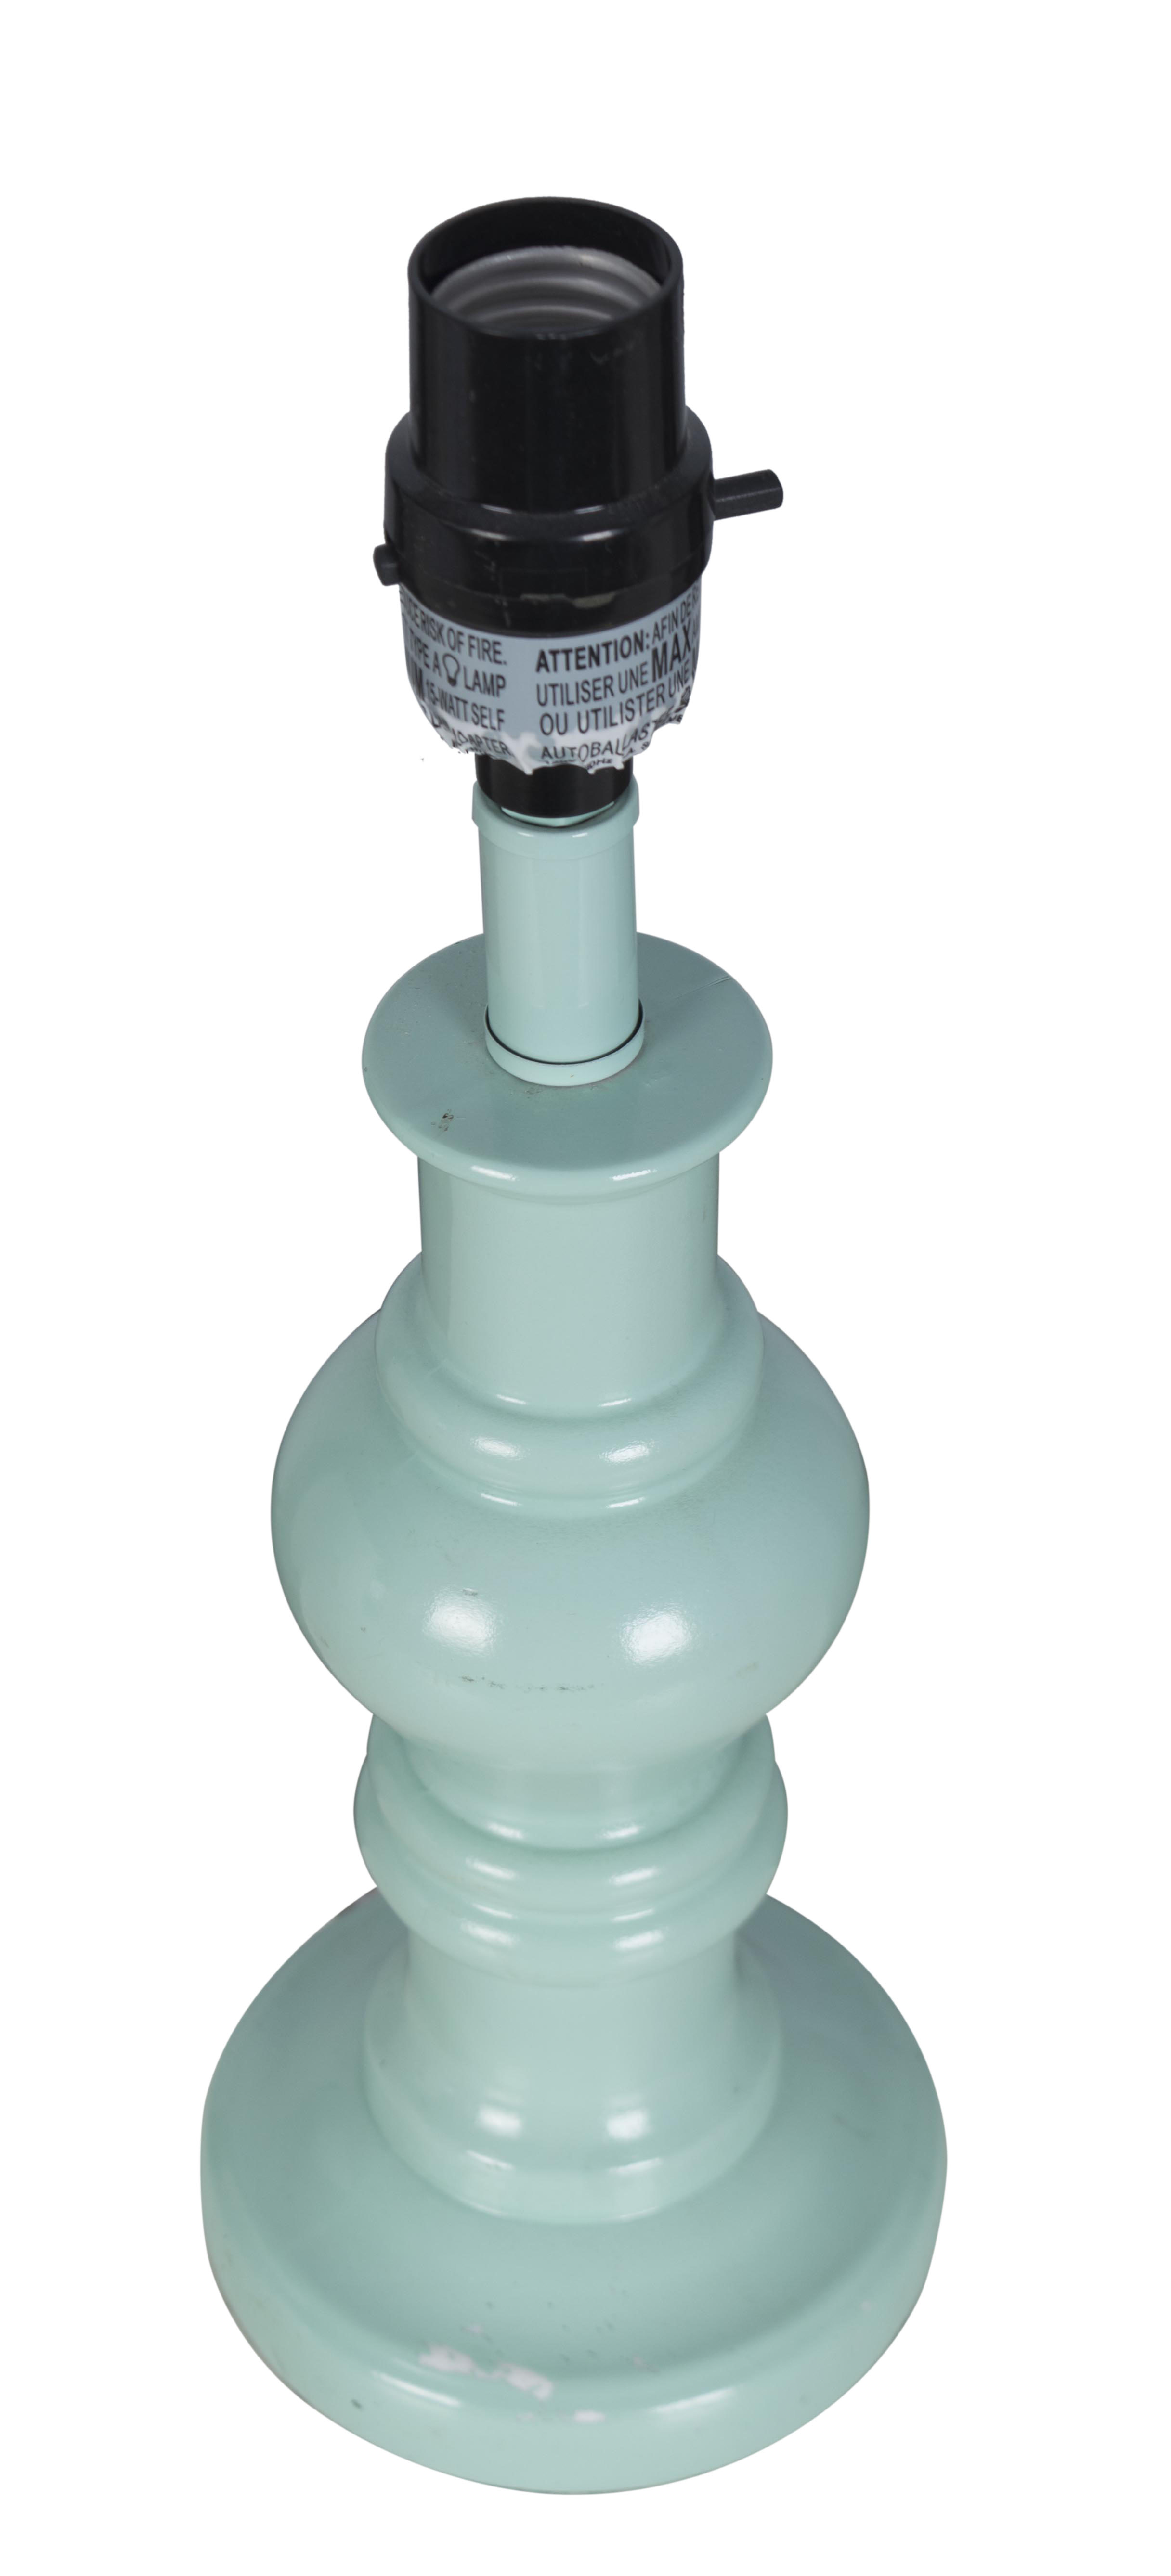 Better Homes & Gardens Turned Accent Lamp Base, Teal - image 4 of 10